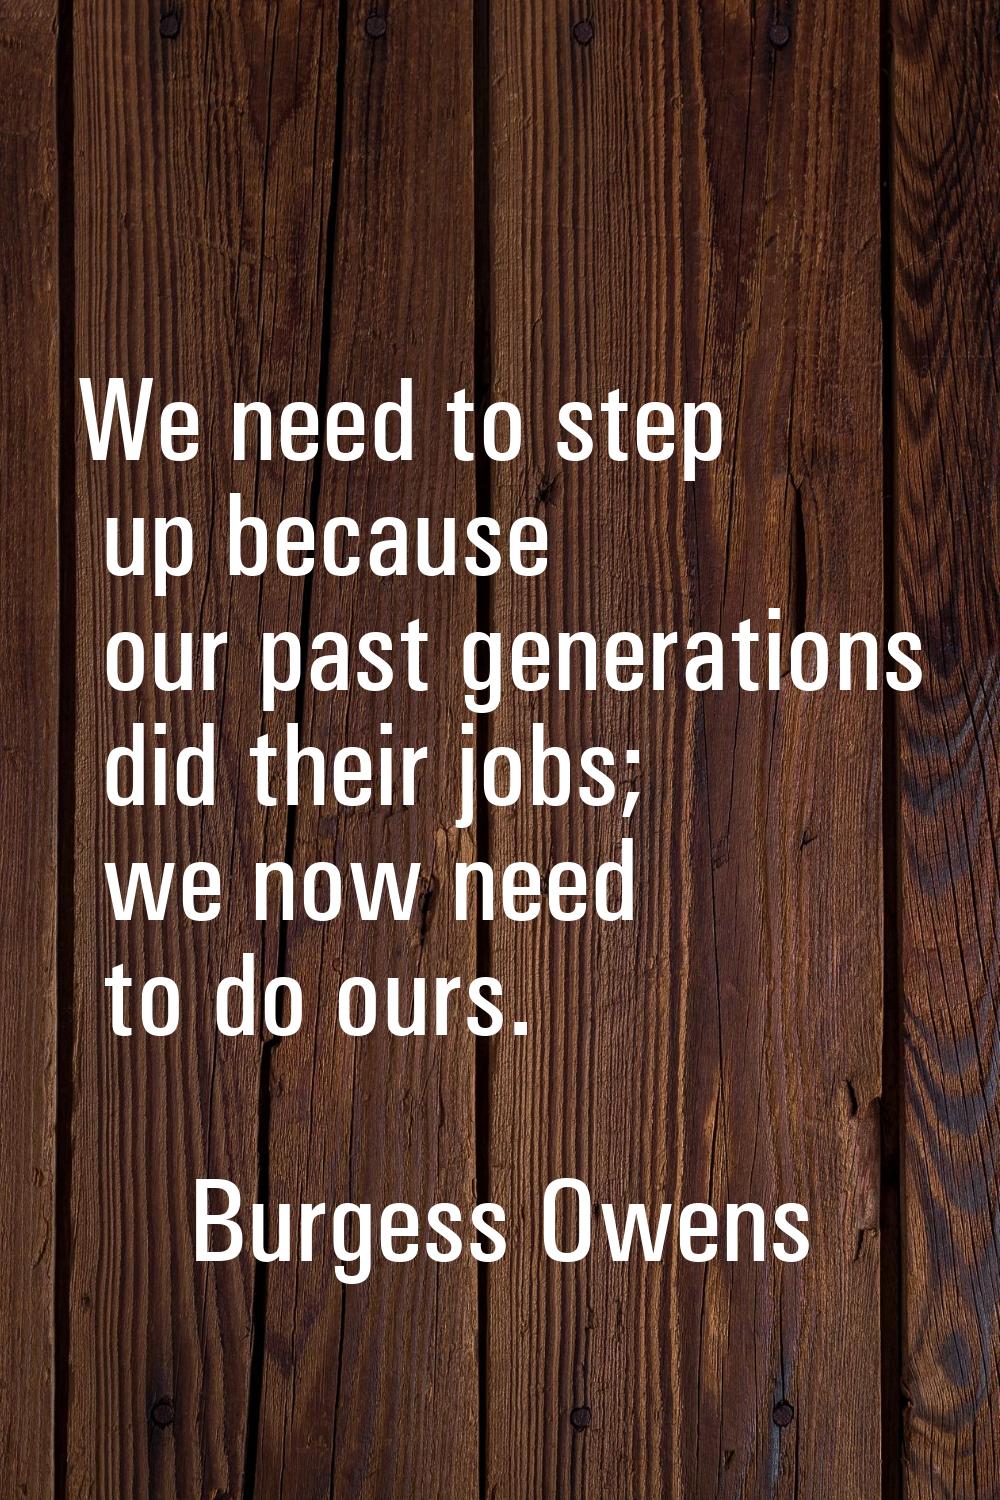 We need to step up because our past generations did their jobs; we now need to do ours.